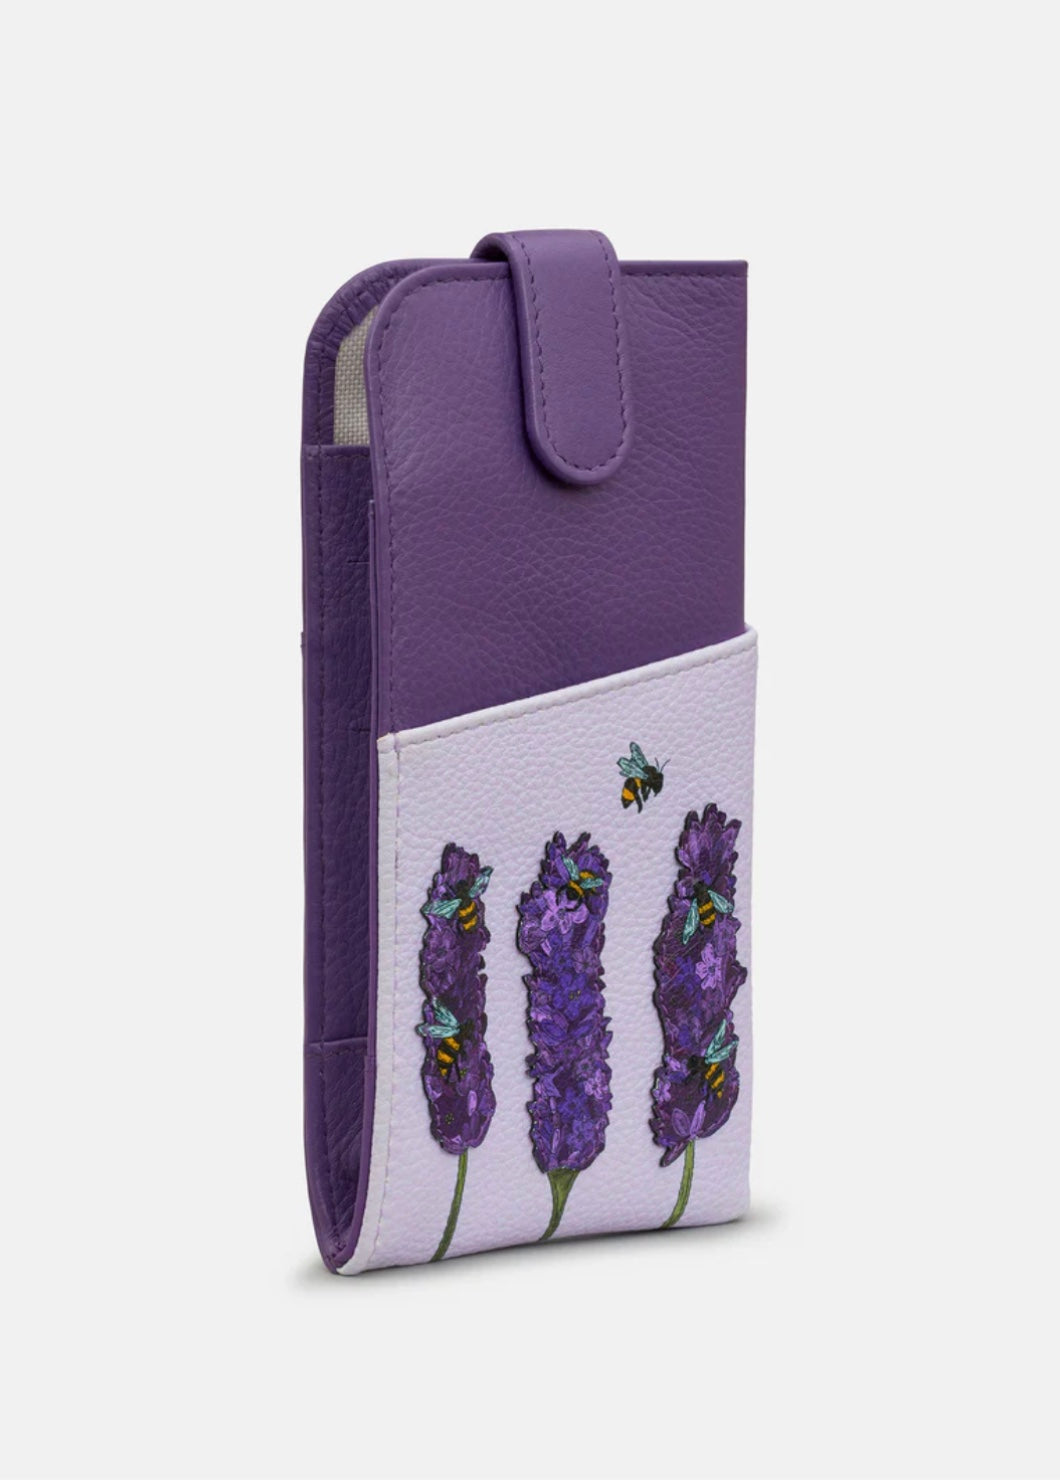 Yoshi Leather - Bees Love Lavender Glasses Case / Plum